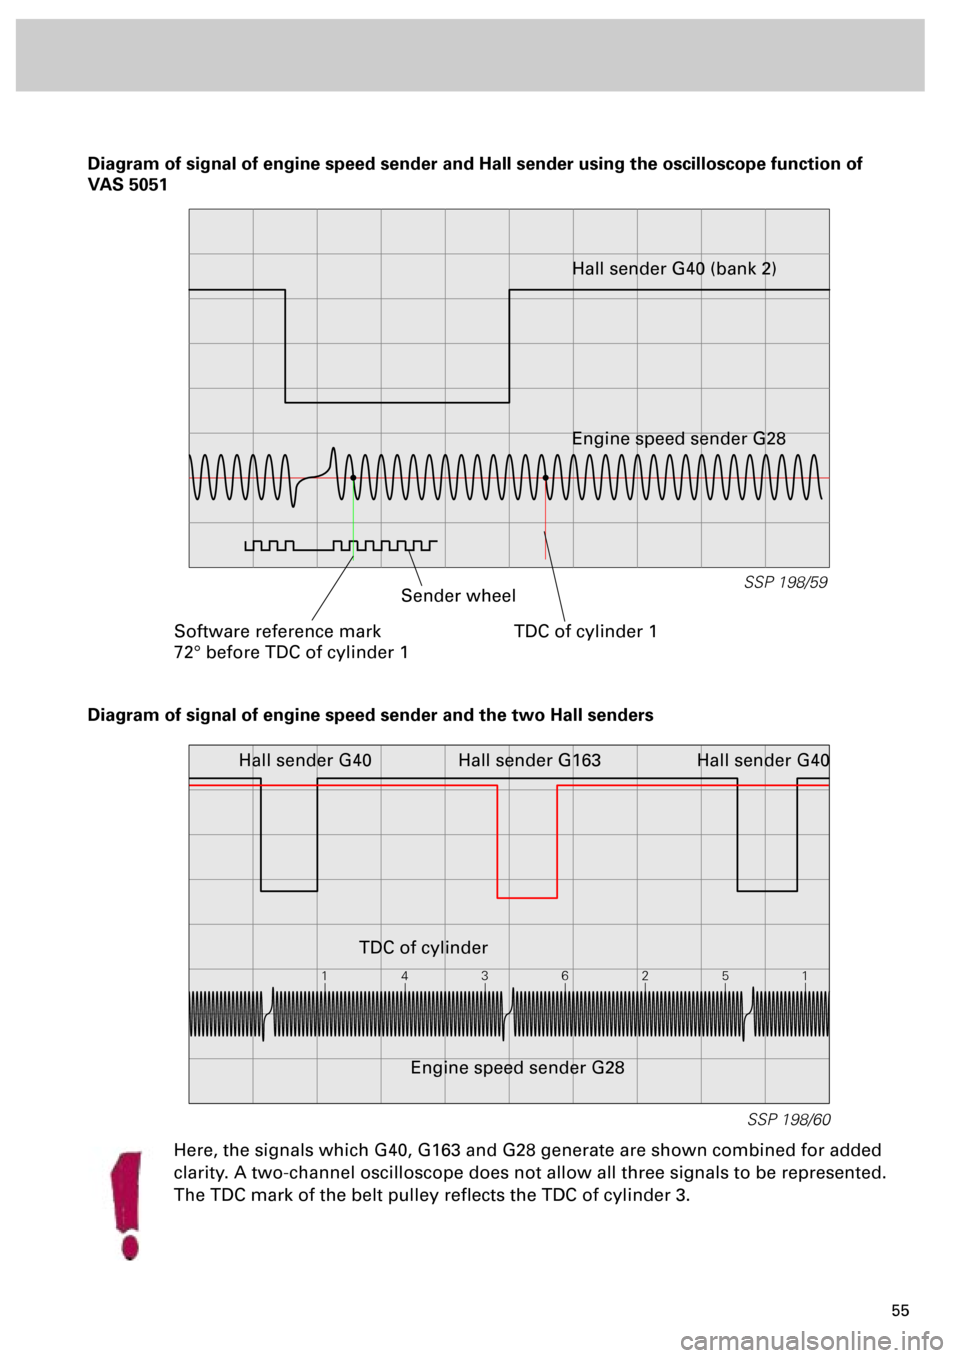 AUDI S4 1998 B5 / 1.G Engine Manual 55
SSP 198/60
1436251
Diagram of signal of engine speed sender and Hall sender using the oscilloscope function of 
VAS 5051
SSP 198/59
Software reference mark
72° before TDC of cylinder 1TDC of cylin